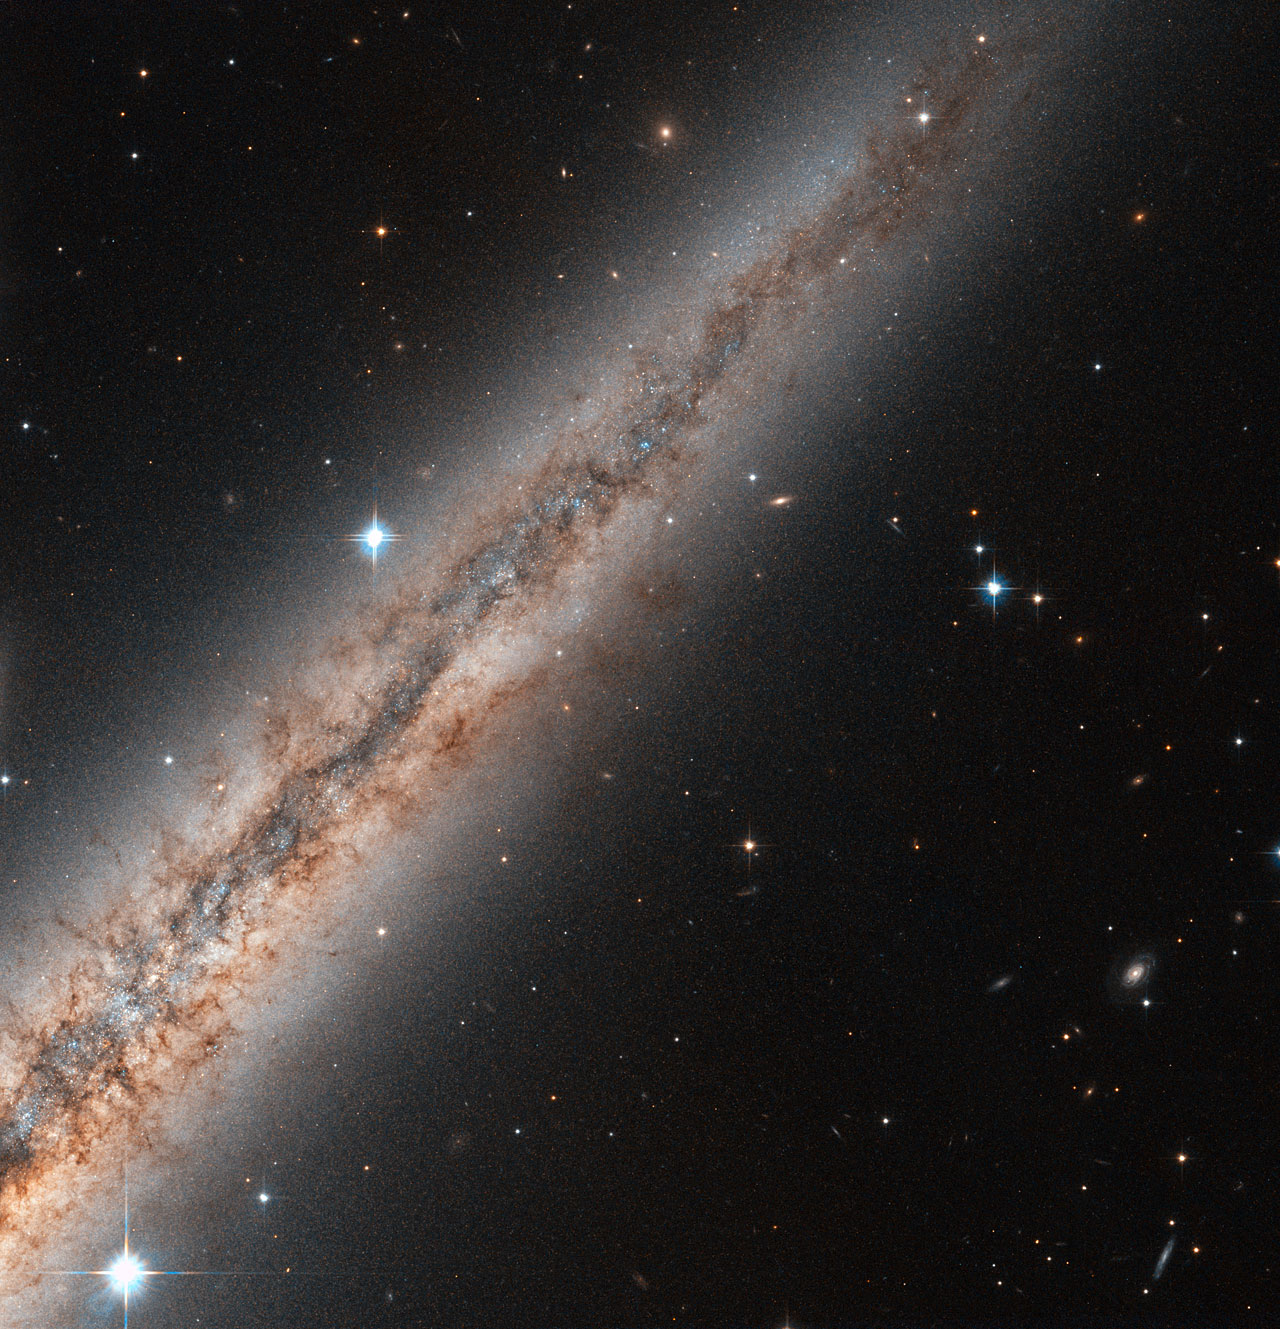 Visible  in the constellation of Andromeda, NGC 891 is located approximately 30  million light-years away from Earth. The NASA/ESA Hubble Space Telescope  turned its powerful wide field Advanced Camera for Surveys towards this  spiral galaxy and took this close-up of its northern half. The galaxy's  central bulge is just out of the image on the bottom left. The  galaxy, spanning some 100 000 light-years, is seen exactly edge-on, and  reveals its thick plane of dust and interstellar gas. While initially  thought to look like our own Milky Way if seen from the side, more  detailed surveys revealed the existence of filaments of dust and gas  escaping the plane of the galaxy into the halo over hundreds of  light-years. They can be clearly seen here against the bright background  of the galaxy halo, expanding into space from the disc of the galaxy. Astronomers  believe these filaments to be the result of the ejection of material  due to supernovae or intense stellar formation activity. By lighting up  when they are born, or exploding when they die, stars cause powerful  winds that can blow dust and gas over hundreds of light-years in space. A  few foreground stars from the Milky Way shine brightly in the image,  while distant elliptical galaxies can be seen in the lower right of the  image. NGC 891 is part of a small group of galaxies bound together by gravity.  A version of this image was entered into the Hubble’s Hidden Treasures Image Processing Competition by contestant Nick Rose. Hidden Treasures is an initiative to  invite astronomy enthusiasts to search the Hubble archive for stunning  images that have never been seen by the general public.